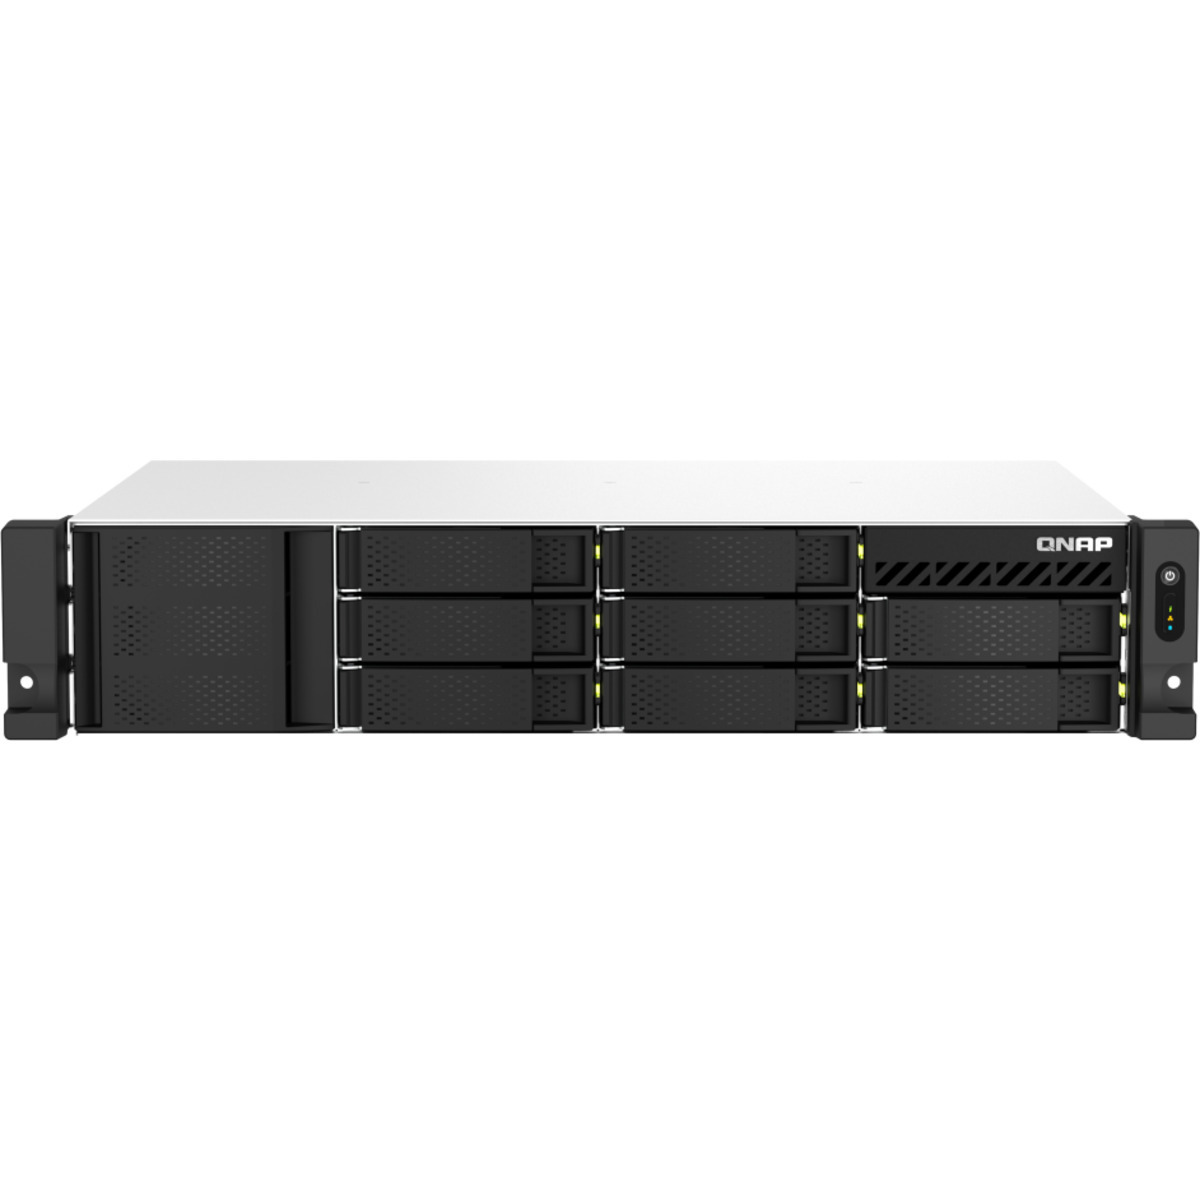 QNAP TS-873AeU 20tb 8-Bay RackMount Multimedia / Power User / Business NAS - Network Attached Storage Device 5x4tb Seagate IronWolf ST4000VN006 3.5 5400rpm SATA 6Gb/s HDD NAS Class Drives Installed - Burn-In Tested - FREE RAM UPGRADE TS-873AeU